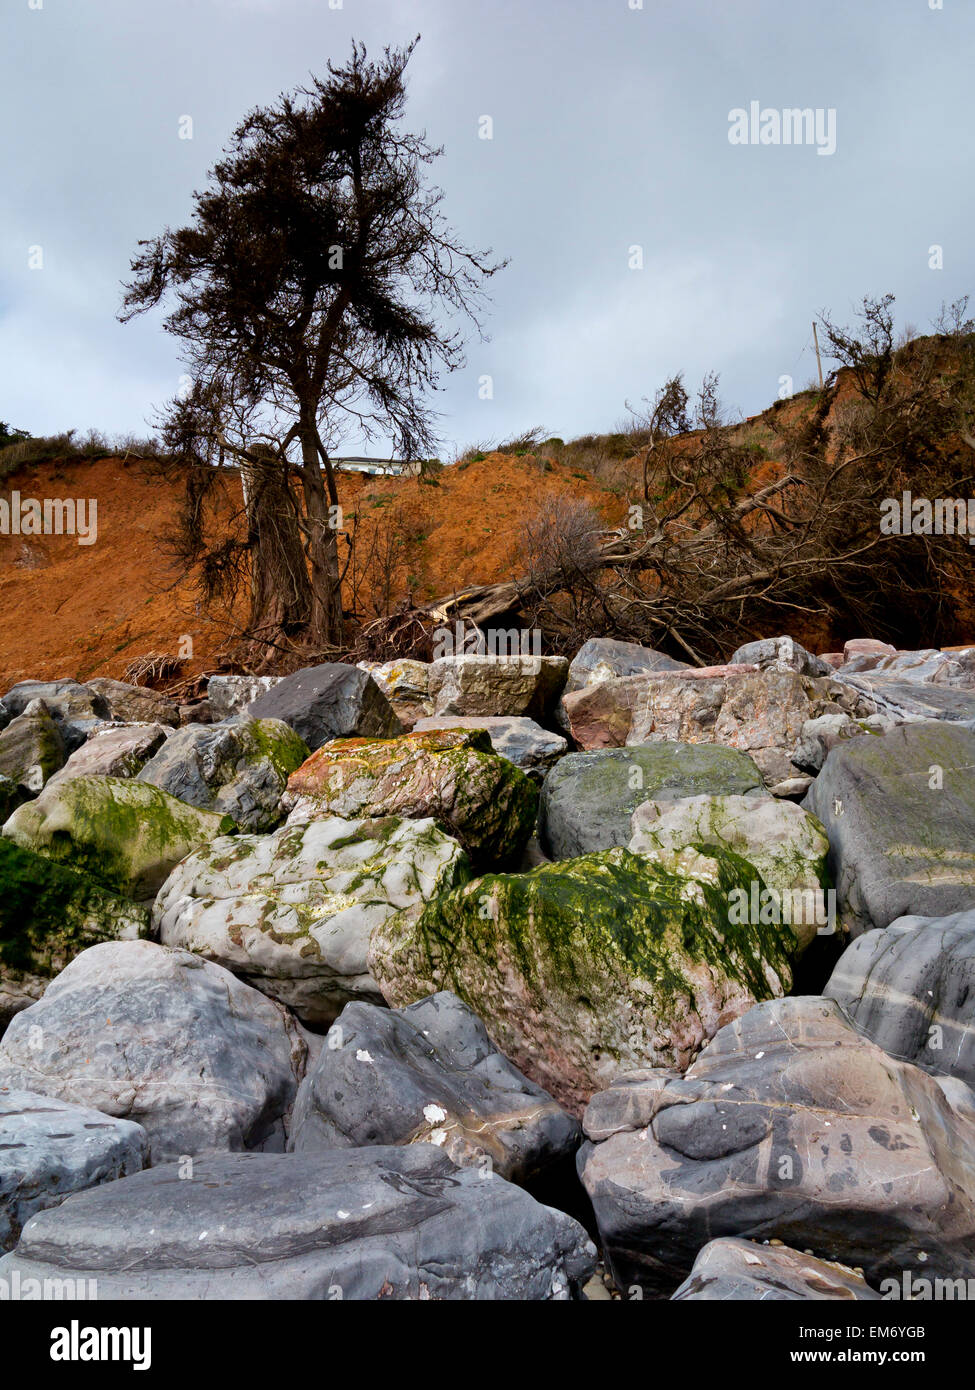 A photograph of rocks used as coastal defences under eroded cliffs at Seaton East Devon England UK Stock Photo